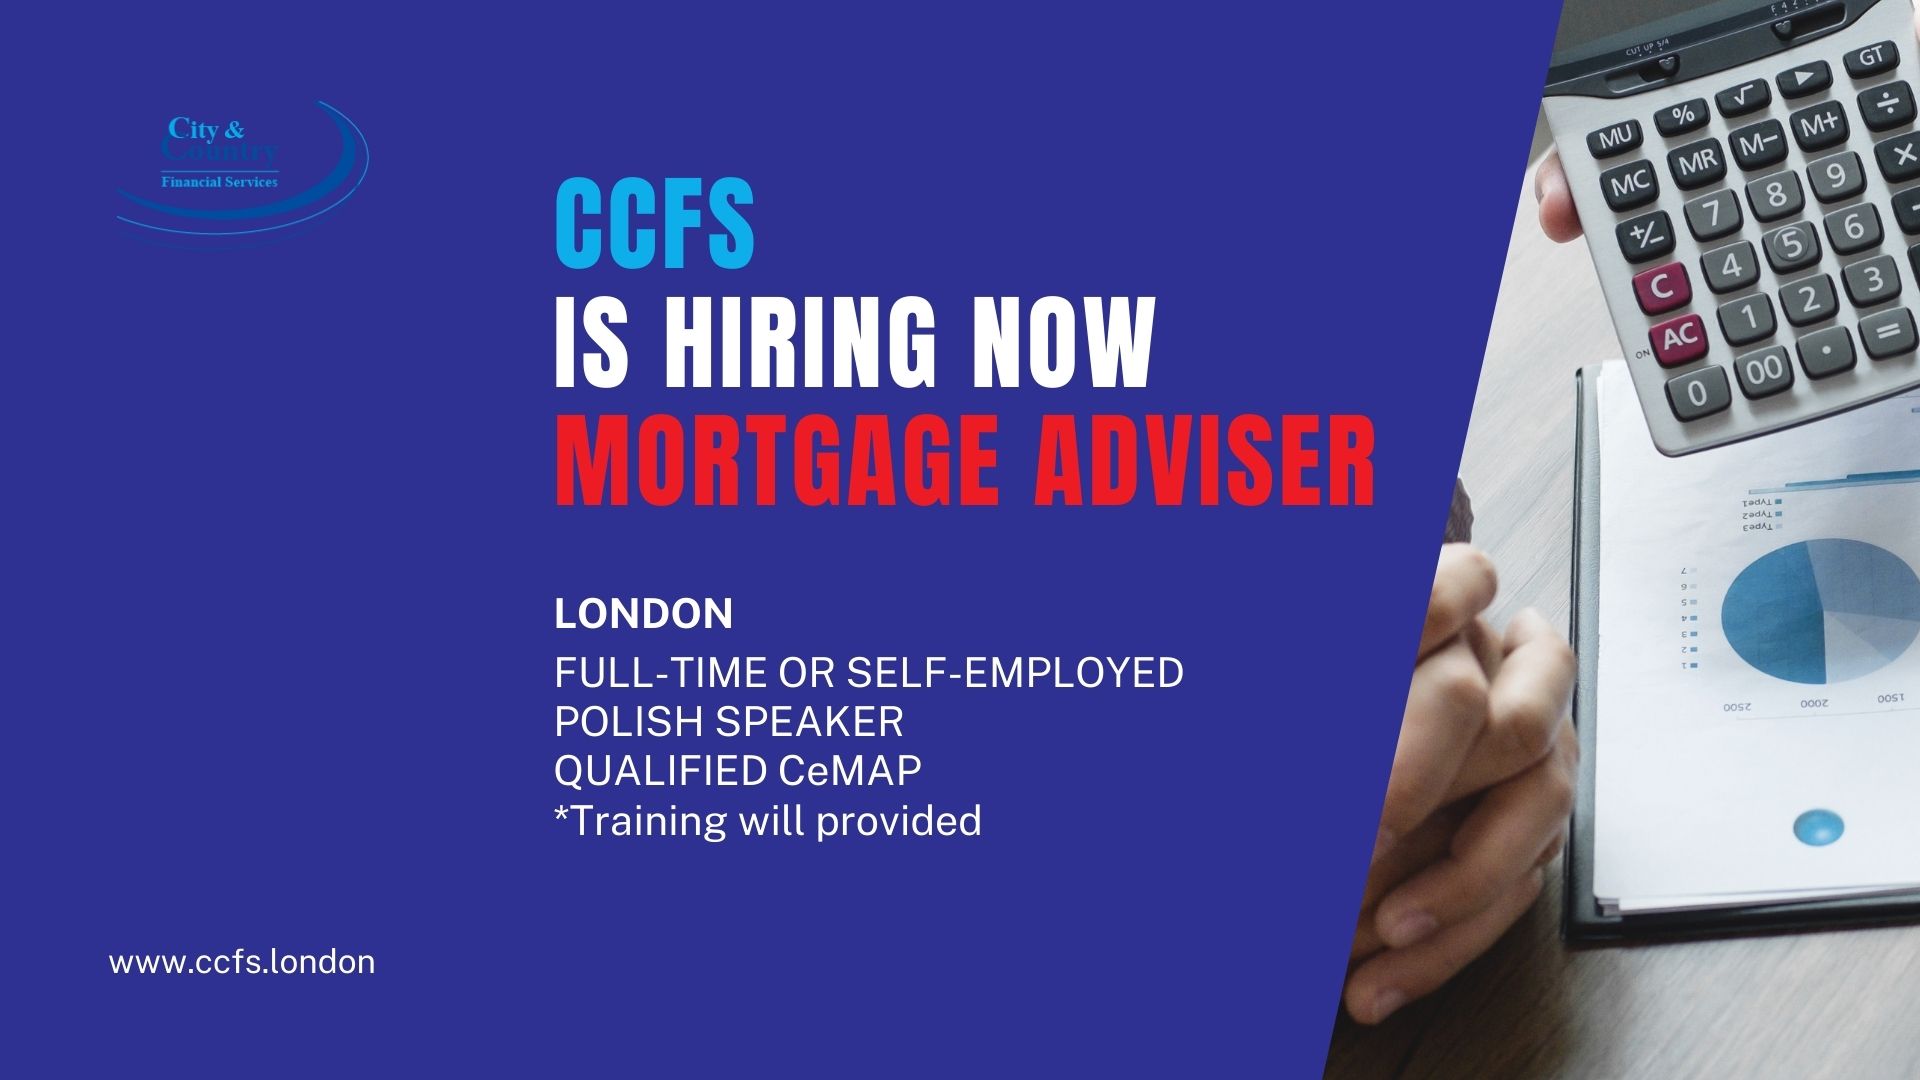 CCFS Recruiting for Mortgage Adviser